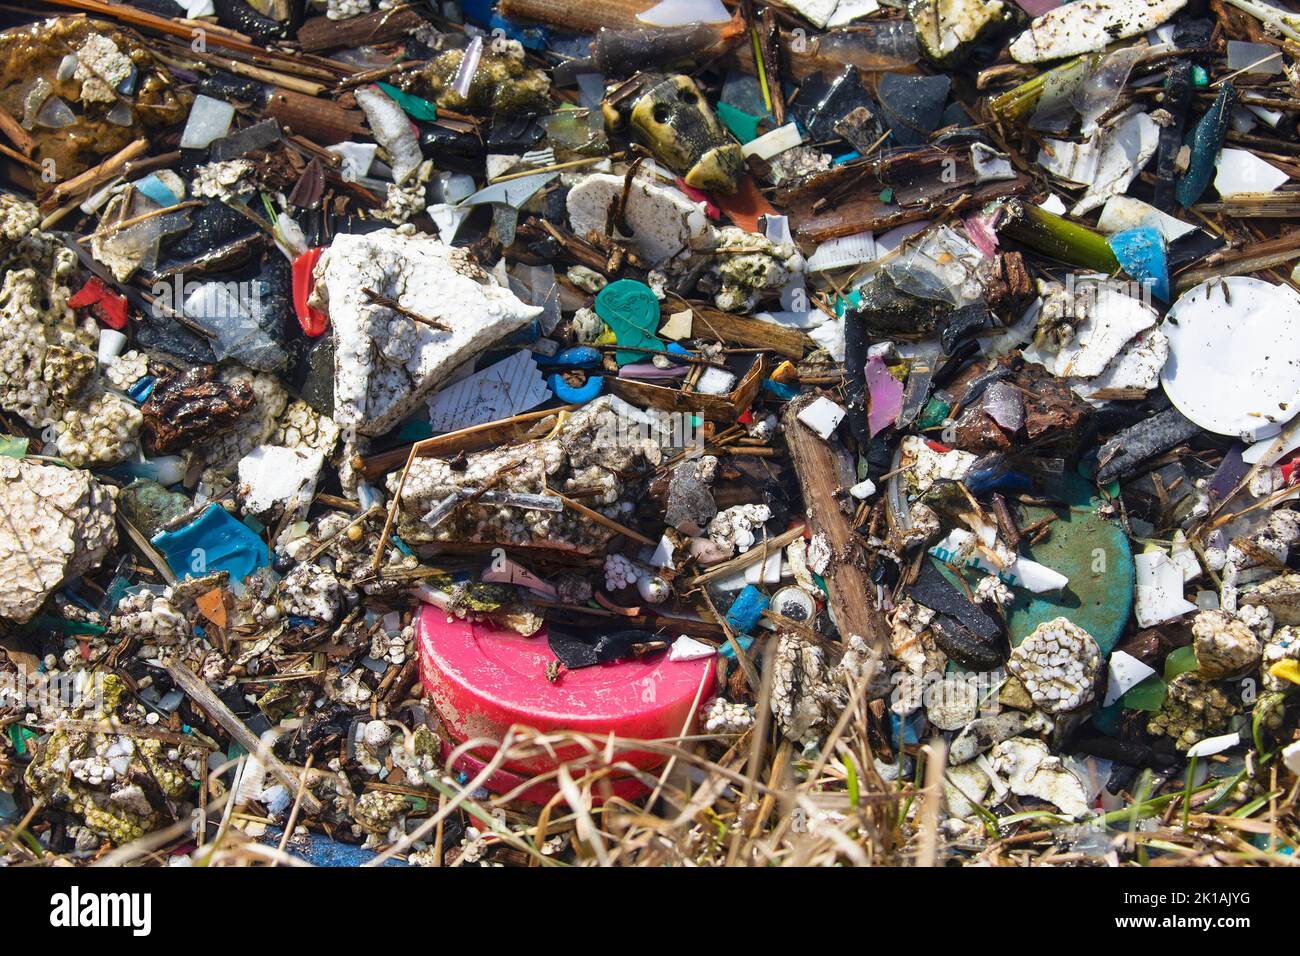 Plastic waste and other trash dumped and carried through a city drainage system where it washed up on the shore of a stormwater treatment pond Stock Photo